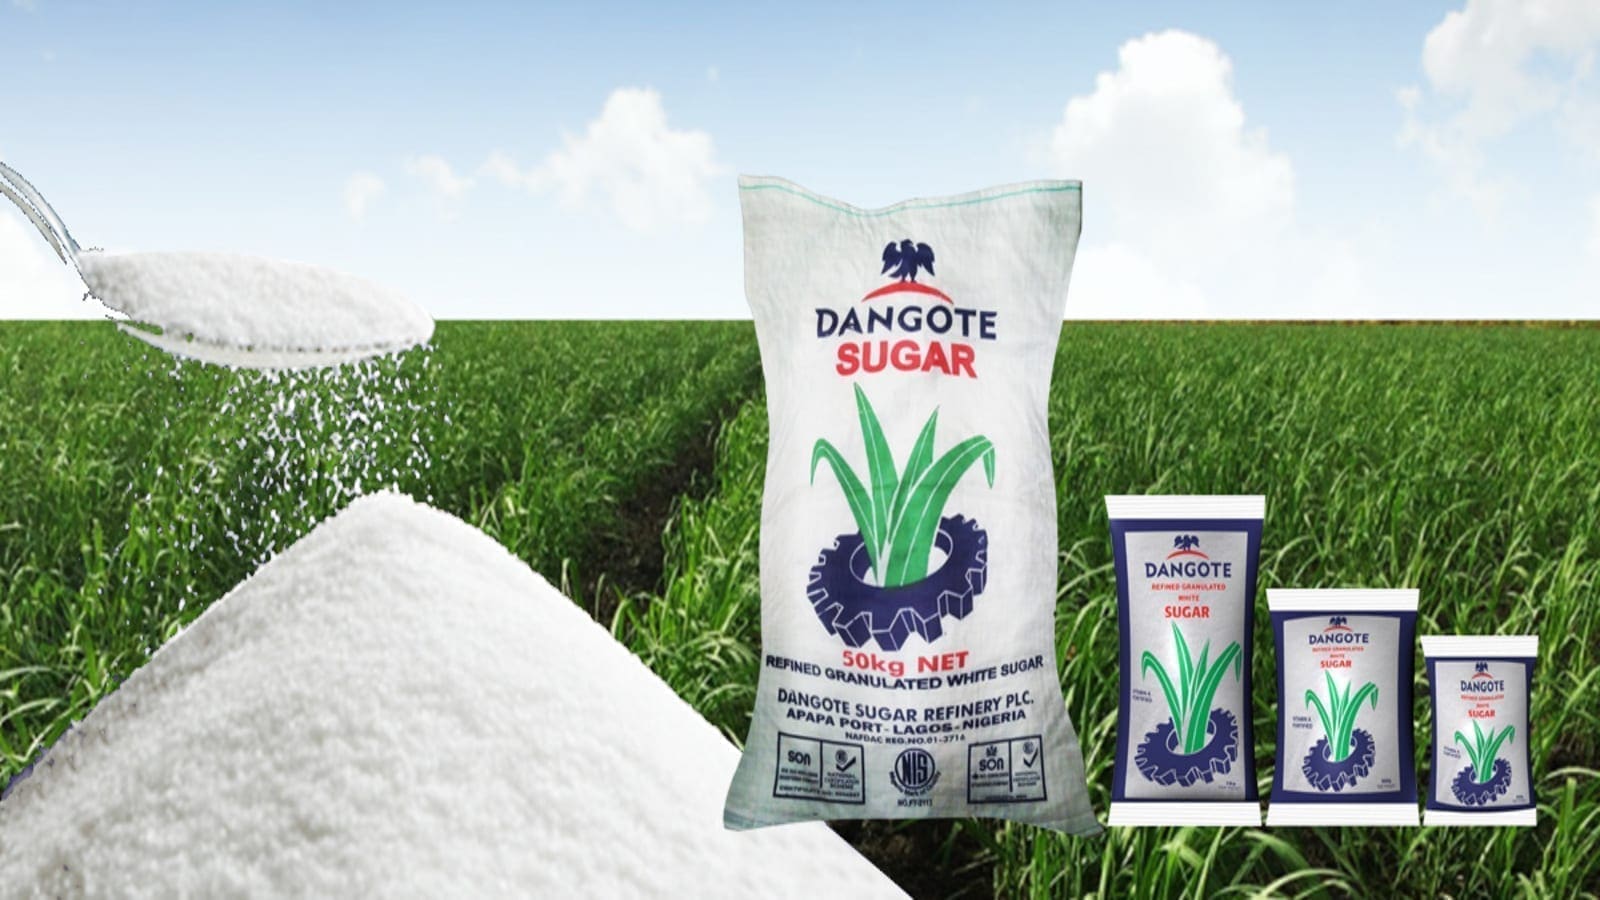 Dangote Sugar shuts operations at Niger State over community wrangles